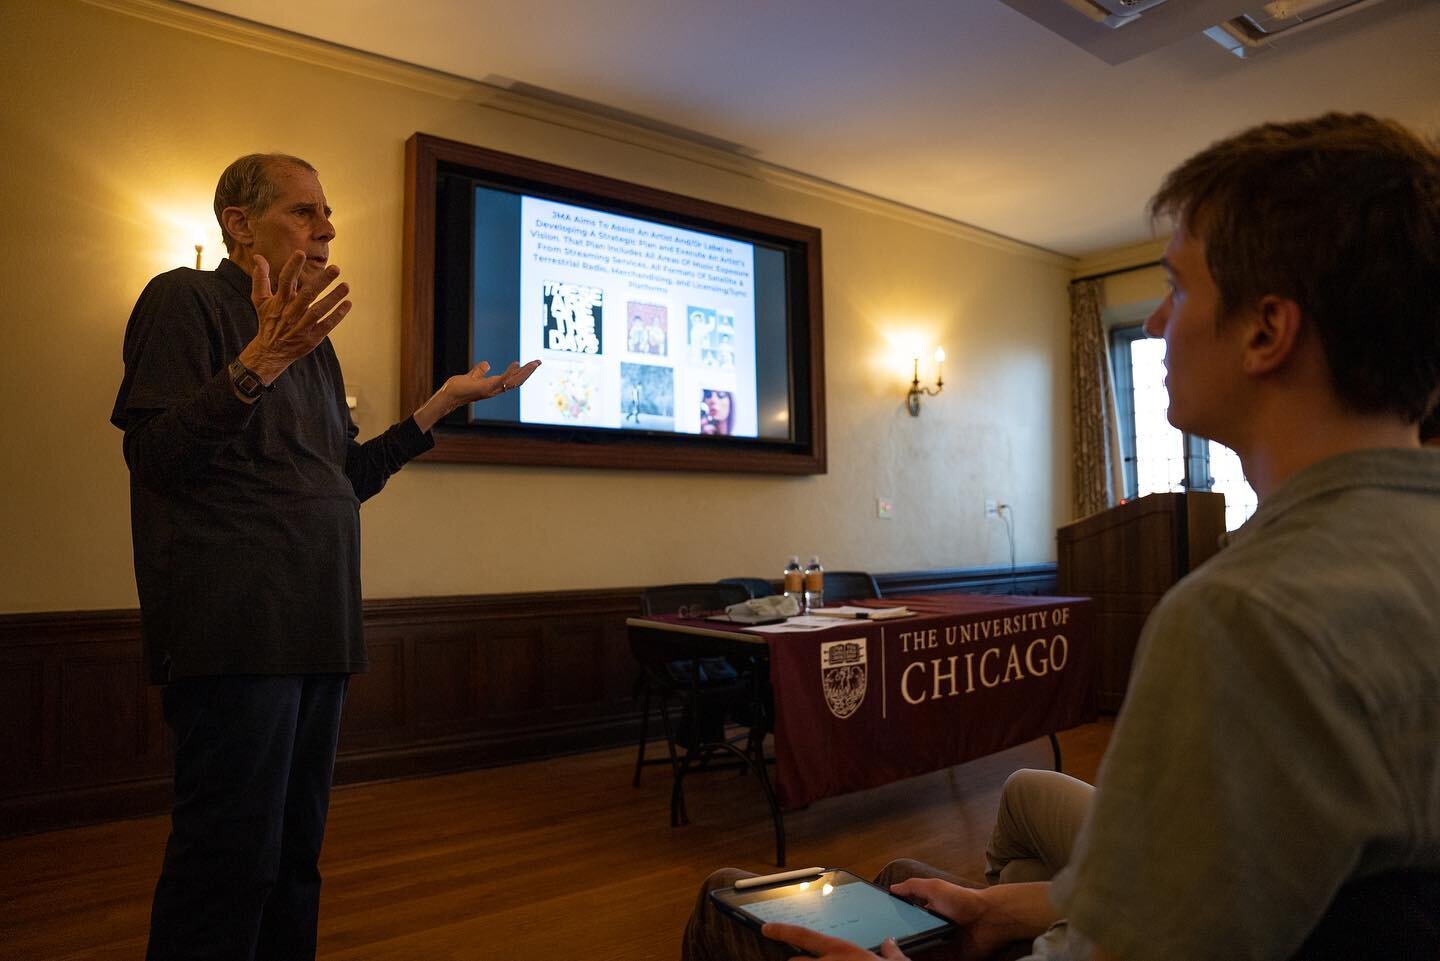 Late last month, Jeff McClusky spoke at the University of Chicago about JMA&rsquo;s mission, Jeff&rsquo;s decades-long experience in the industry, his nuanced takes on the industry, and much more.

📷: @johncottermedia